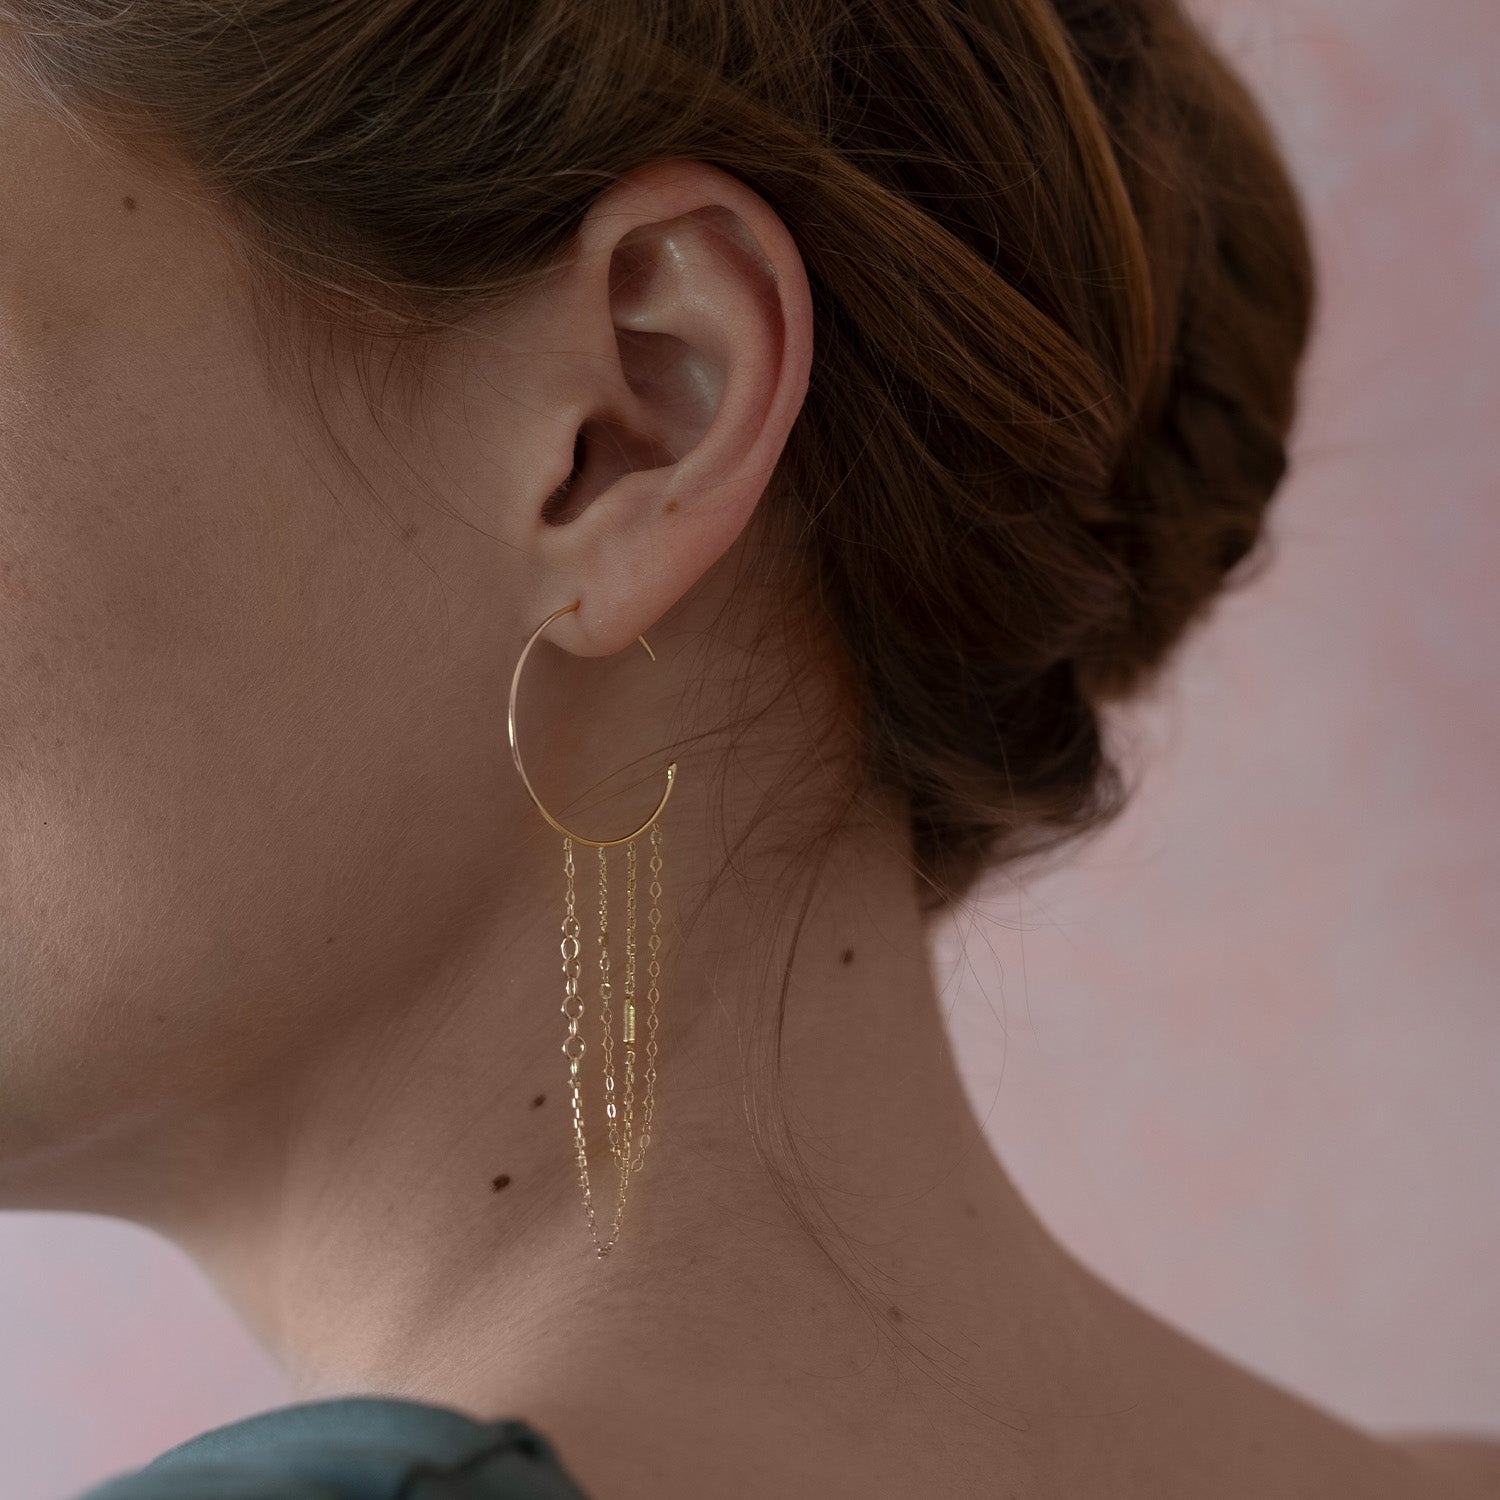 18ct Gold Chains Galore dangling hoops on model